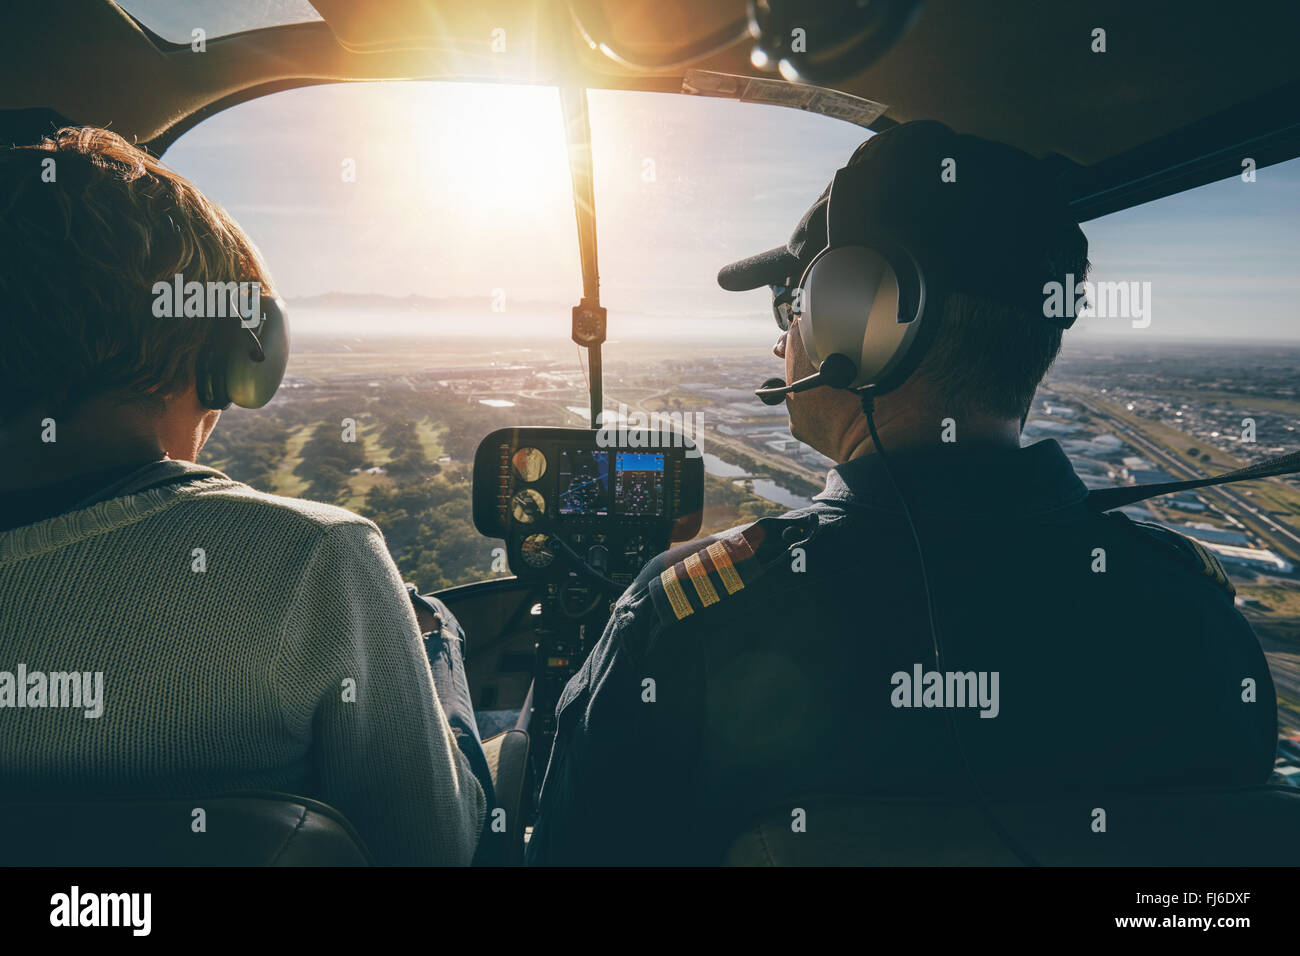 Inside view of a helicopter in flight, with man and woman pilots flying a helicopter on a sunny day. Stock Photo